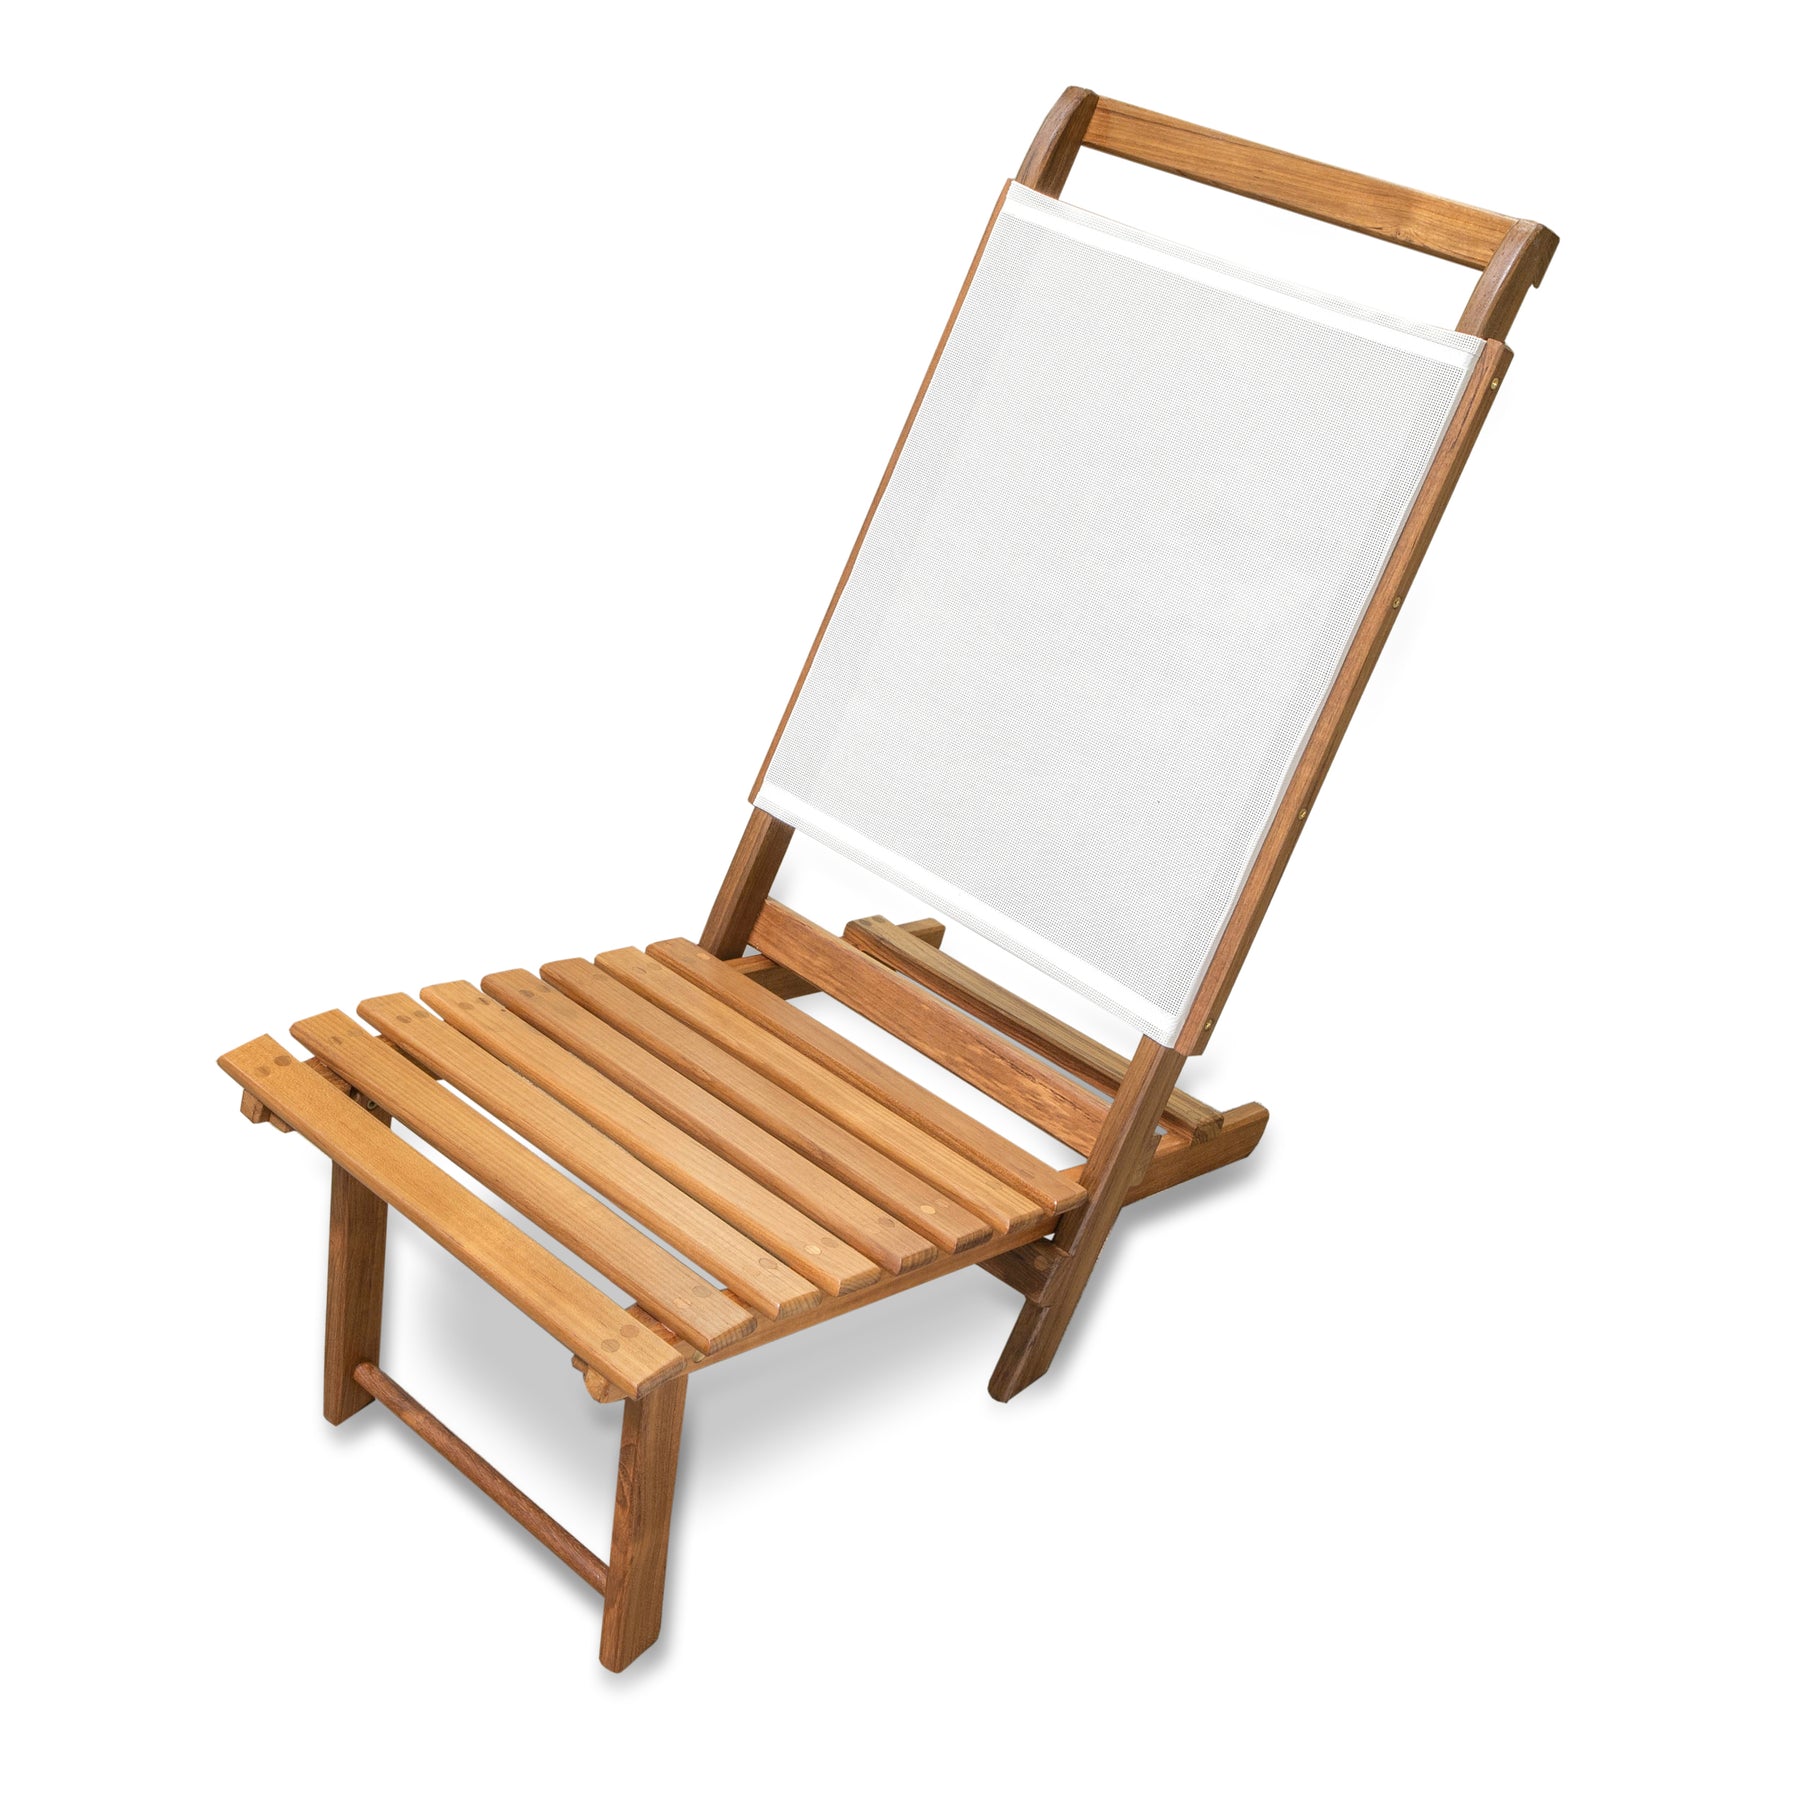 Sand Chair with White Batyline Seat Back - 60074